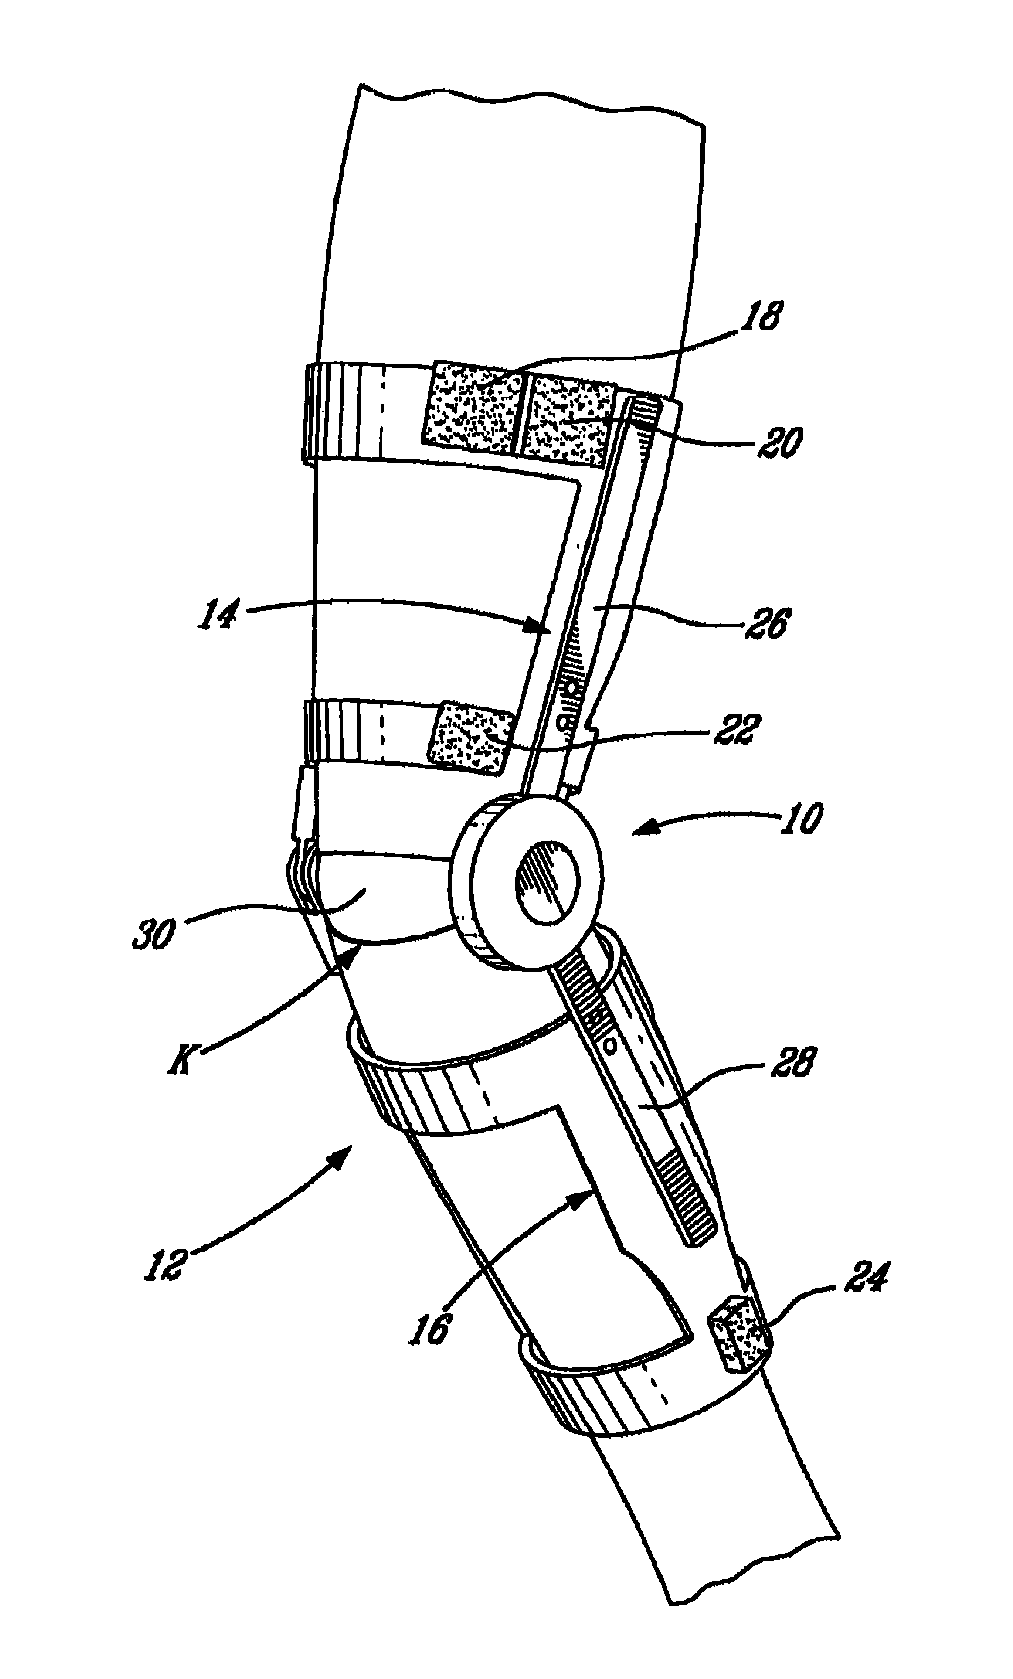 High torque active mechanism for orthotic and/or prosthetic devices